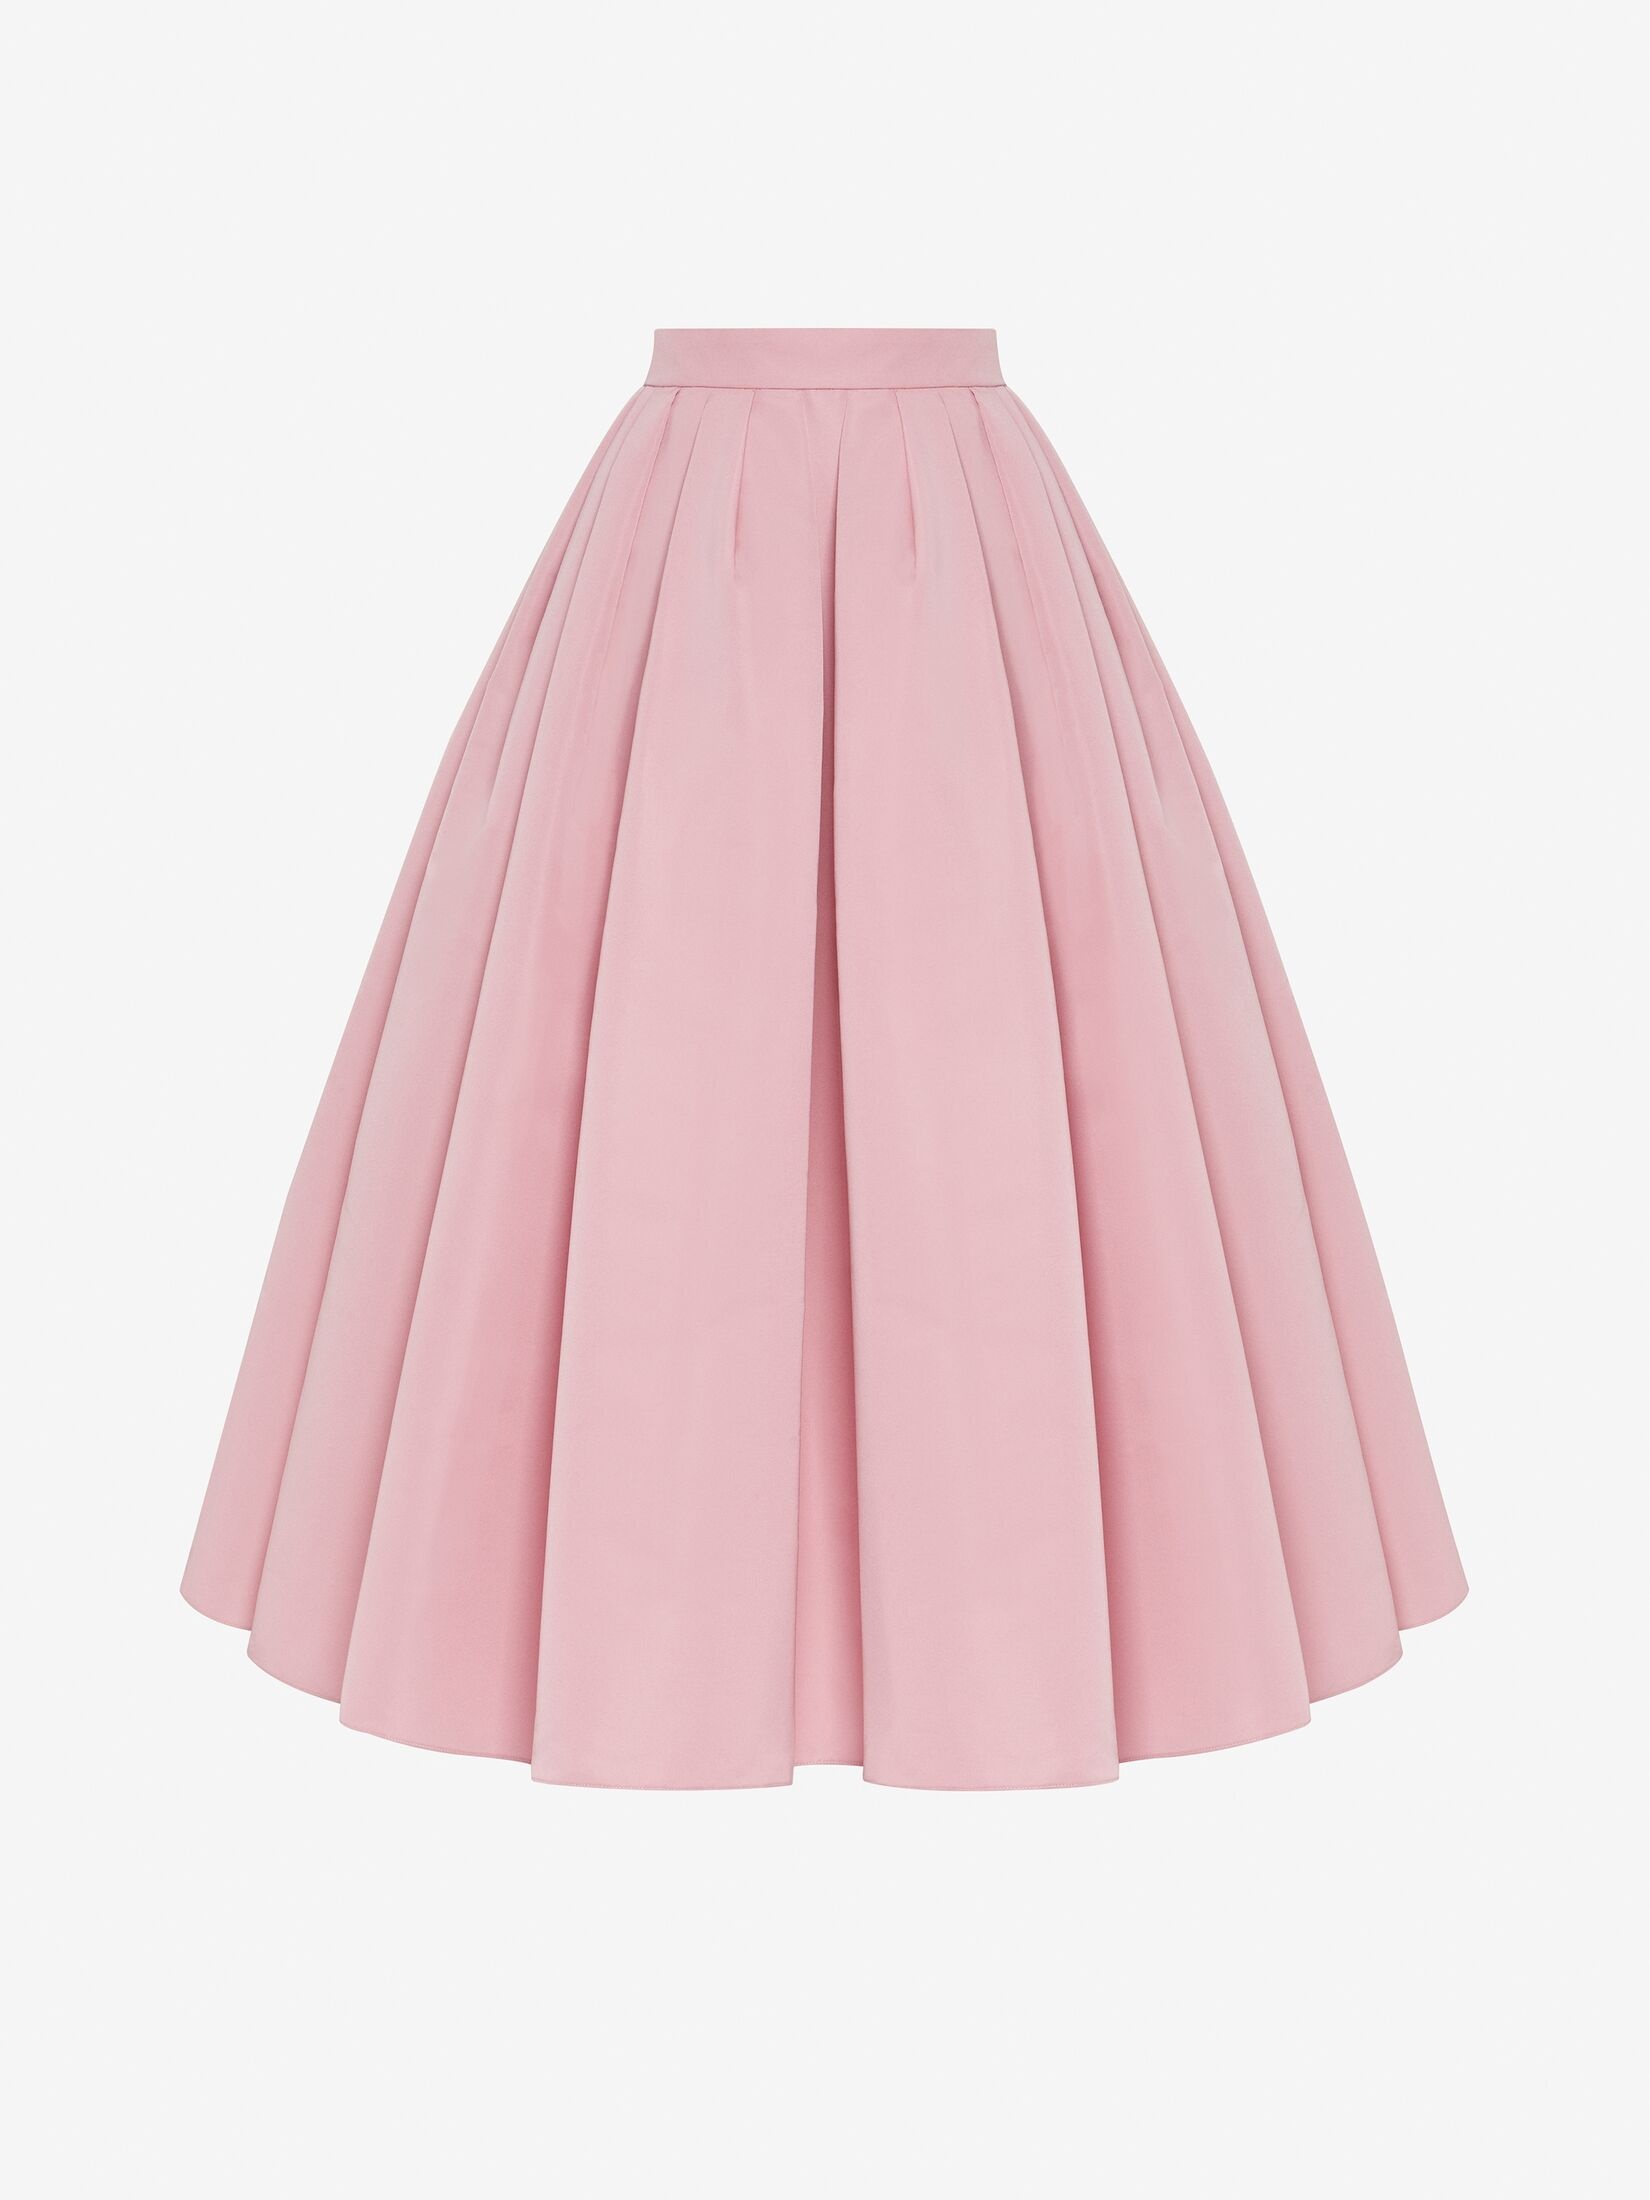 Women's Pleated Midi Skirt in Pale Pink - 1